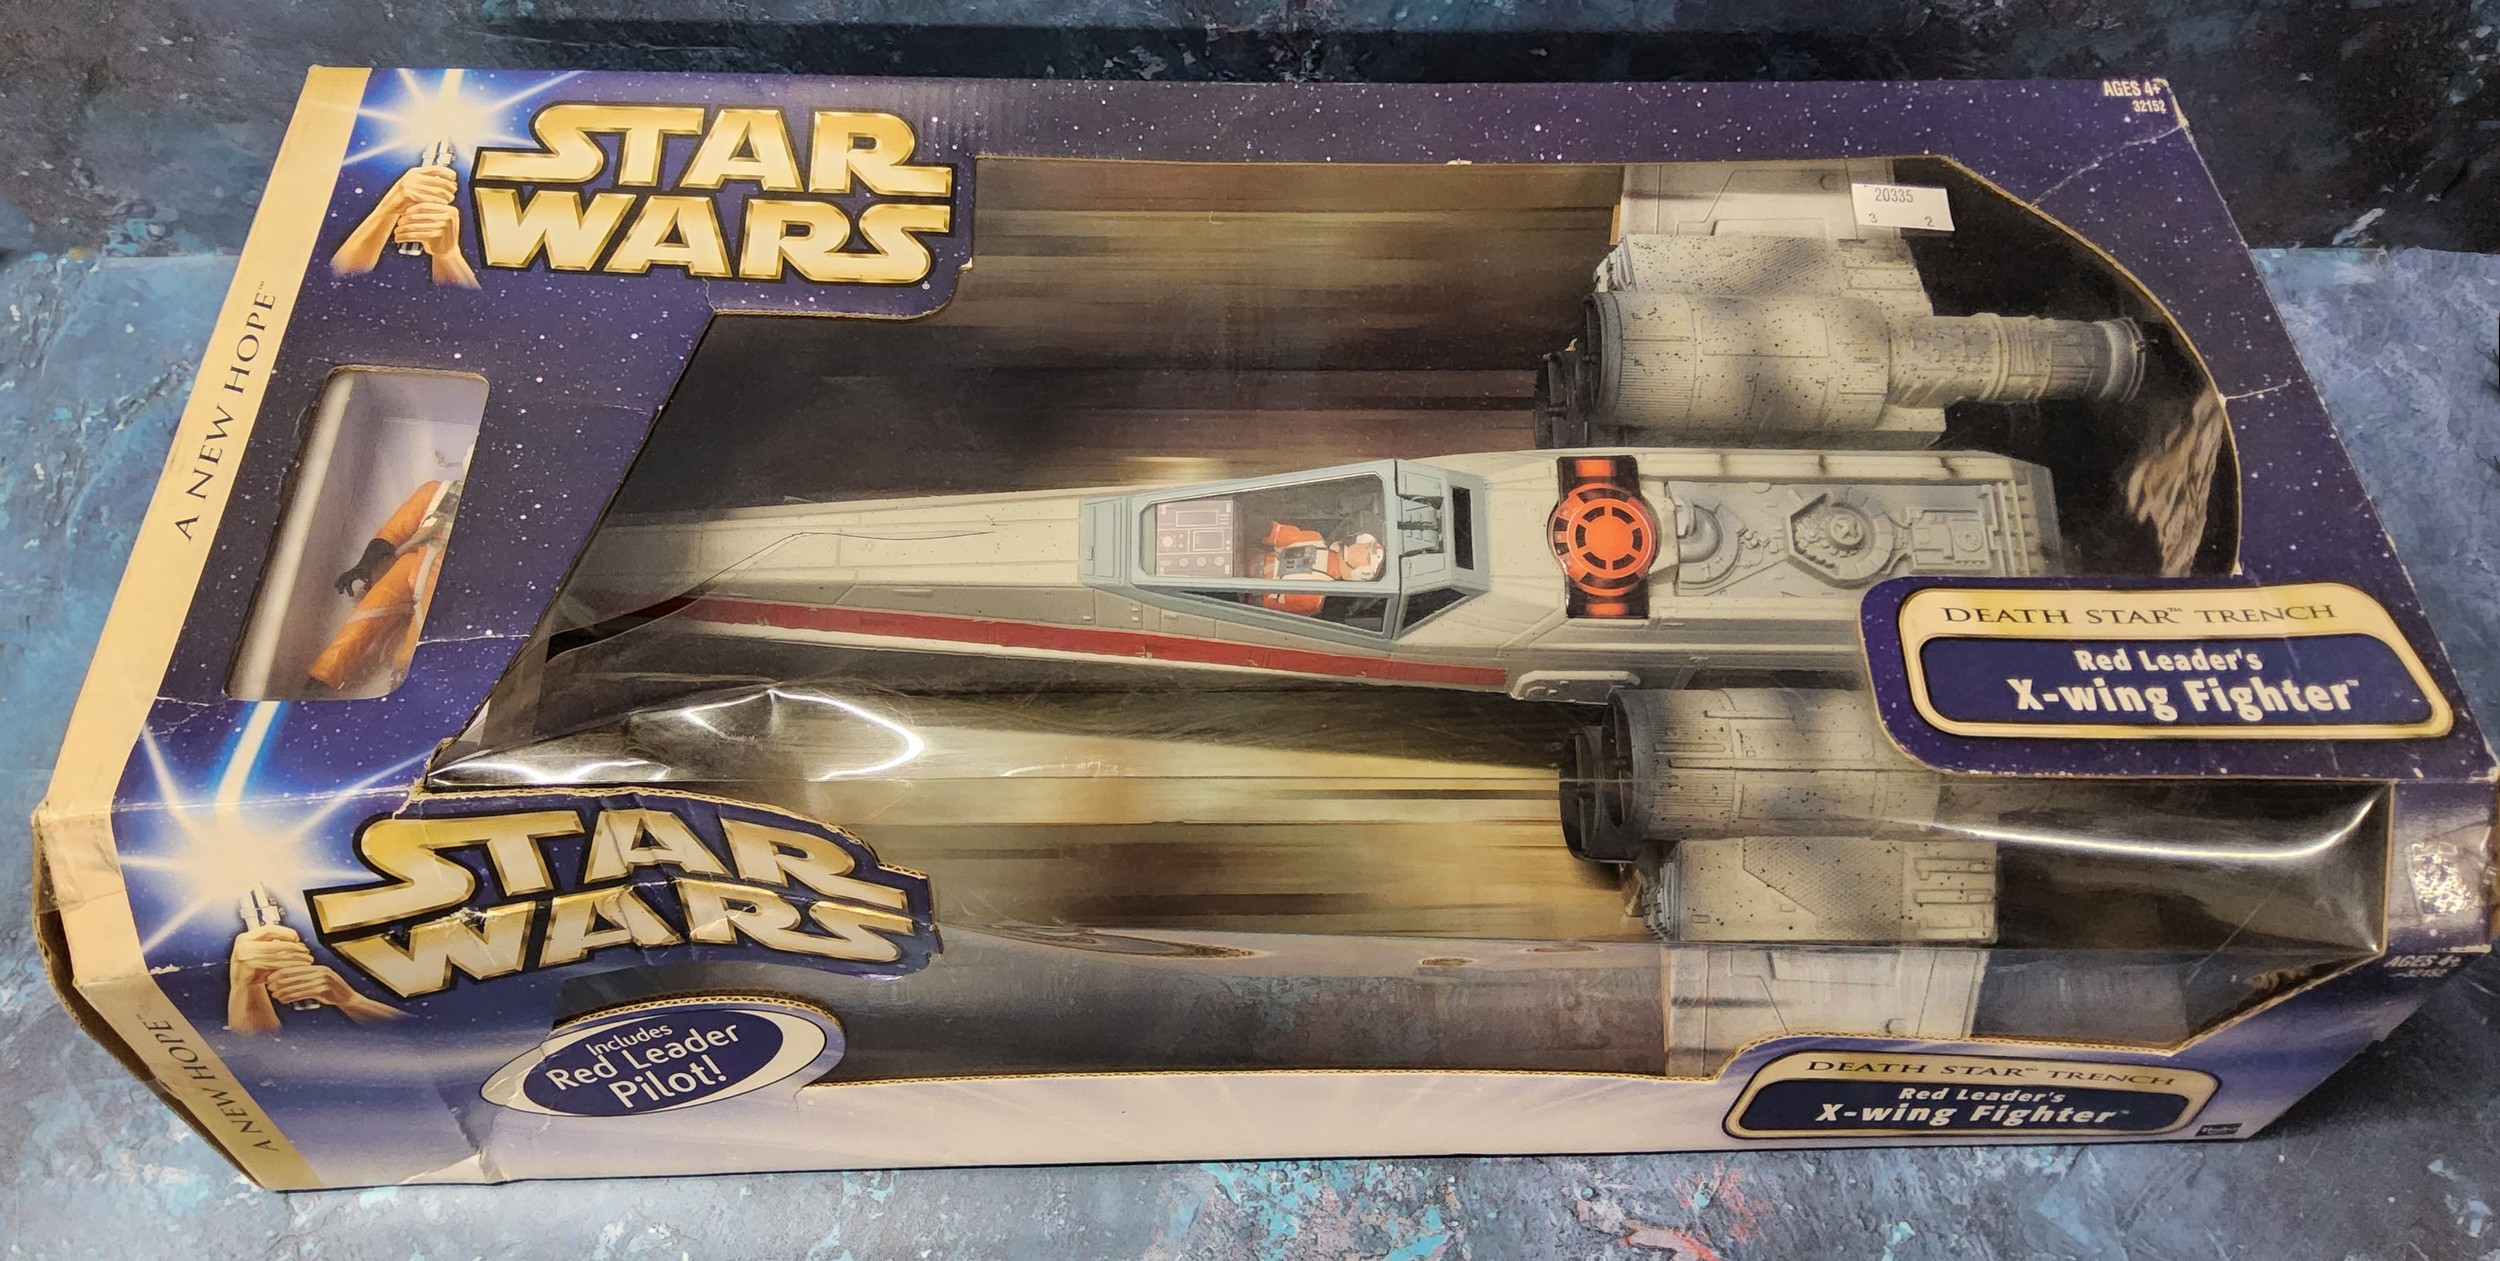 A Star Wars Death Star Trench Red Leader's X-Wing Fighter, complete with Red Leader Pilot, appears - Image 2 of 3